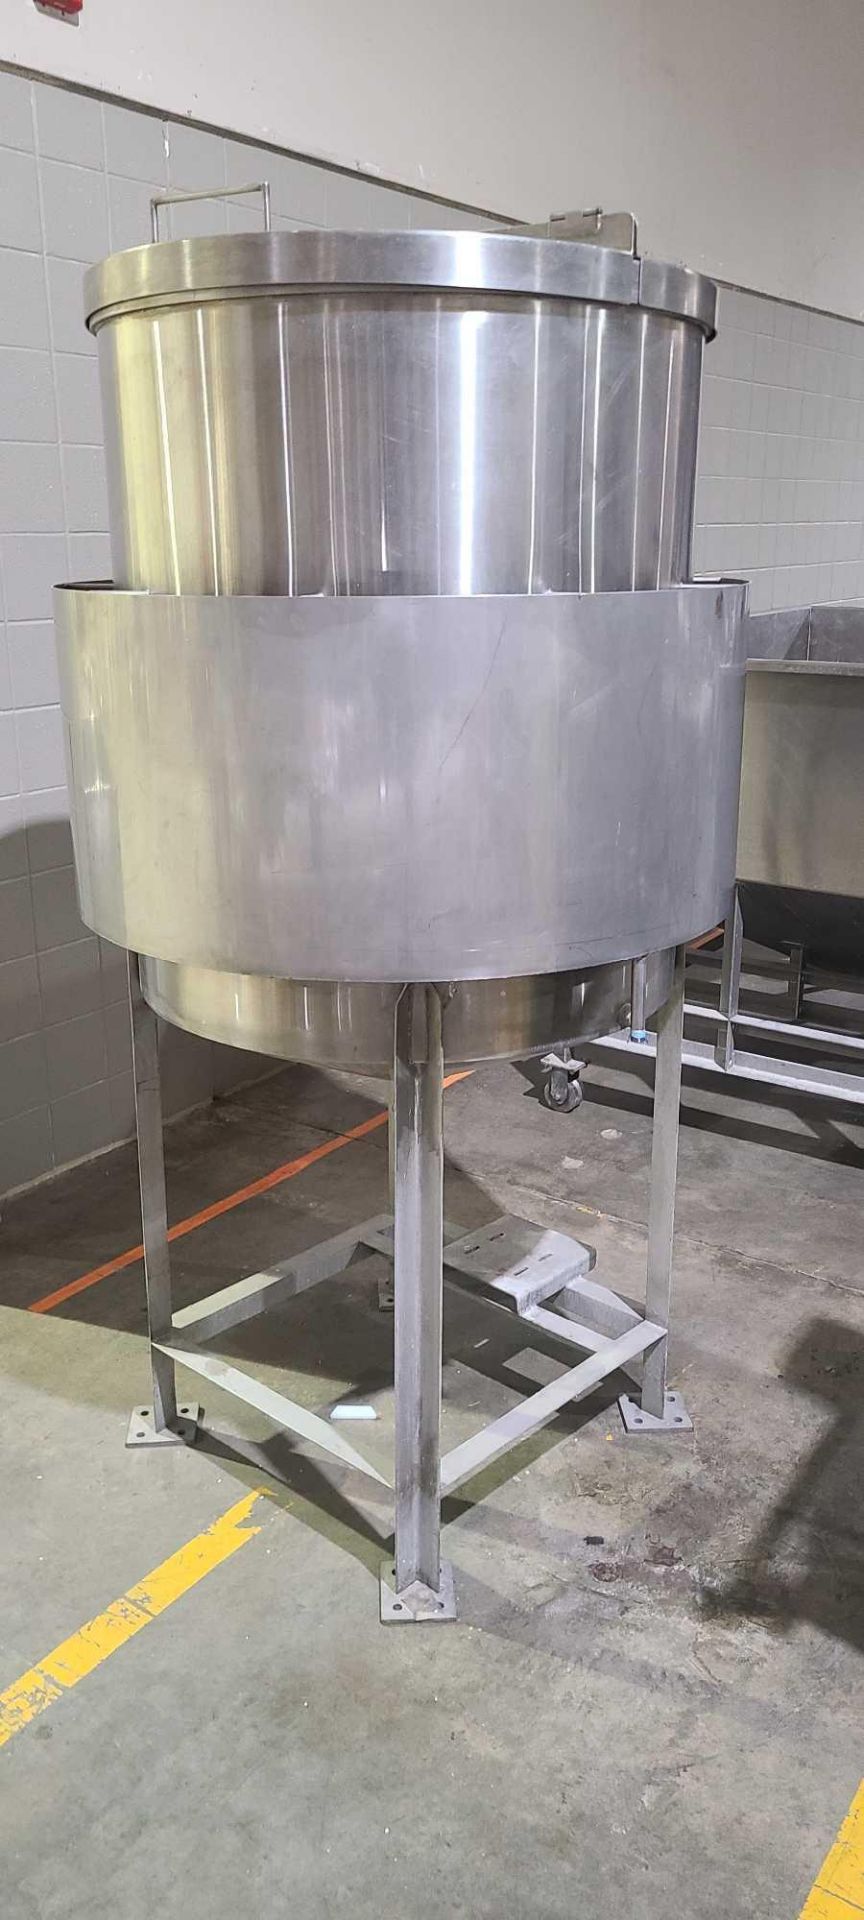 Stainless Steel Holding Tank with Half Outer Shell - Image 2 of 9